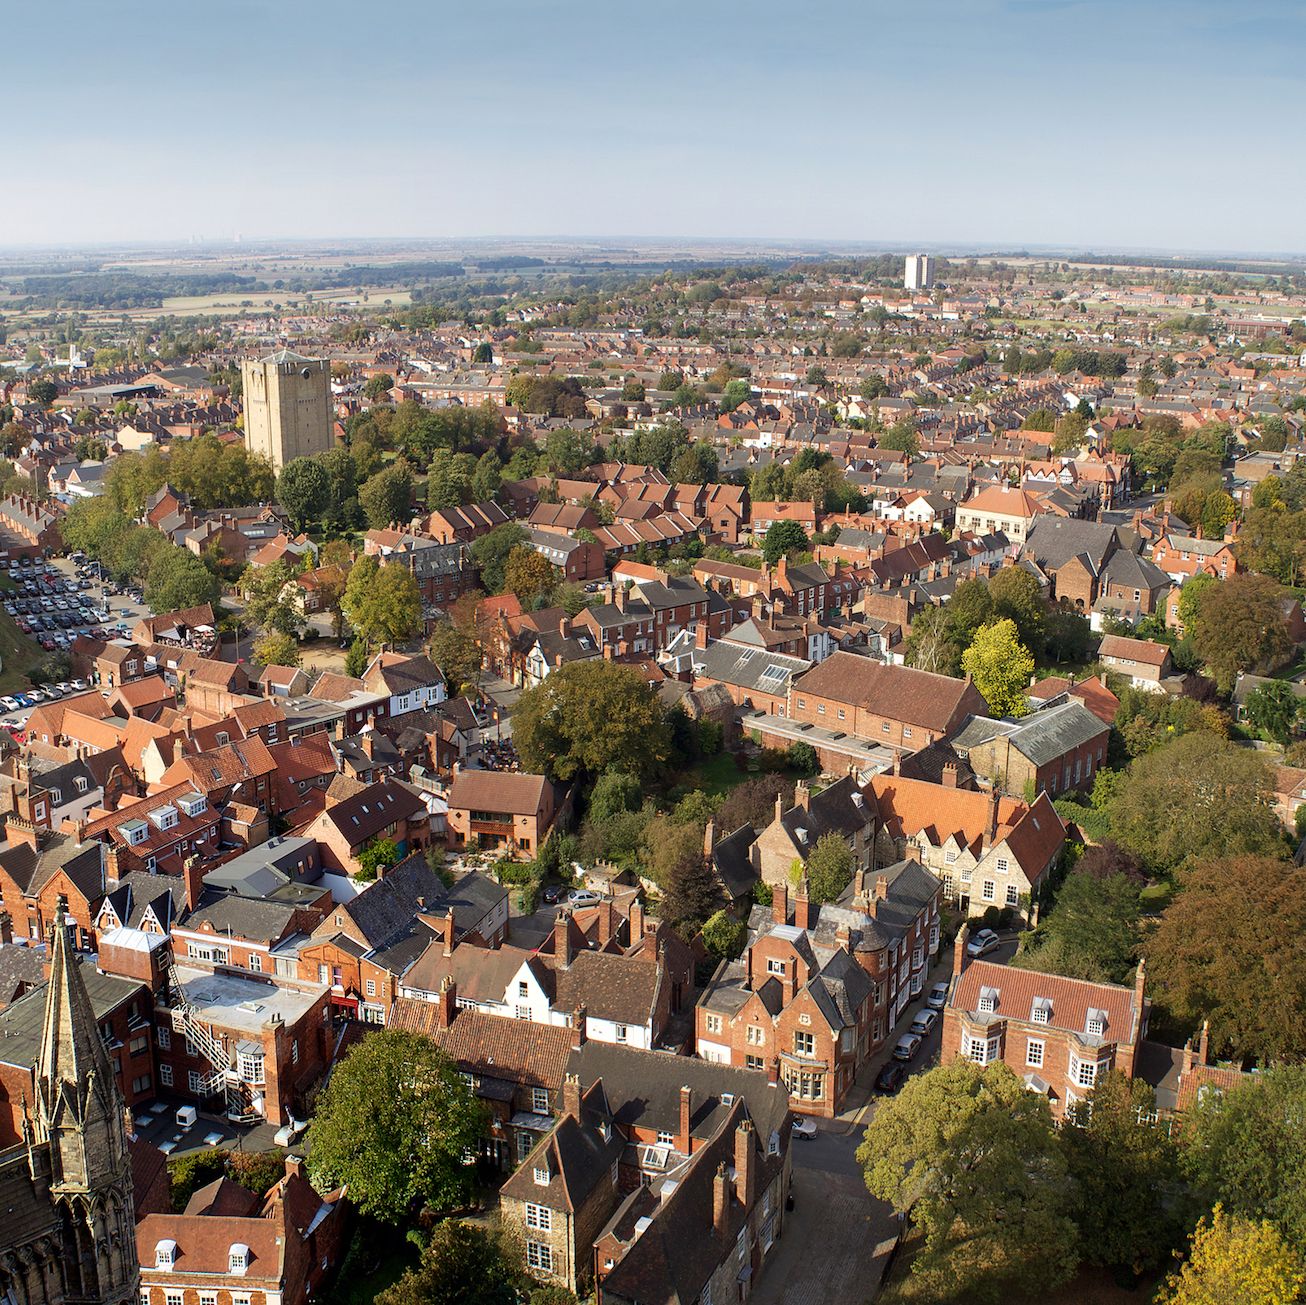 a stunning view of the ancient city of lincoln, england, taken from the cathedral bell tower   272 feet high stitched panoramic image   this image is a composite of smaller sections